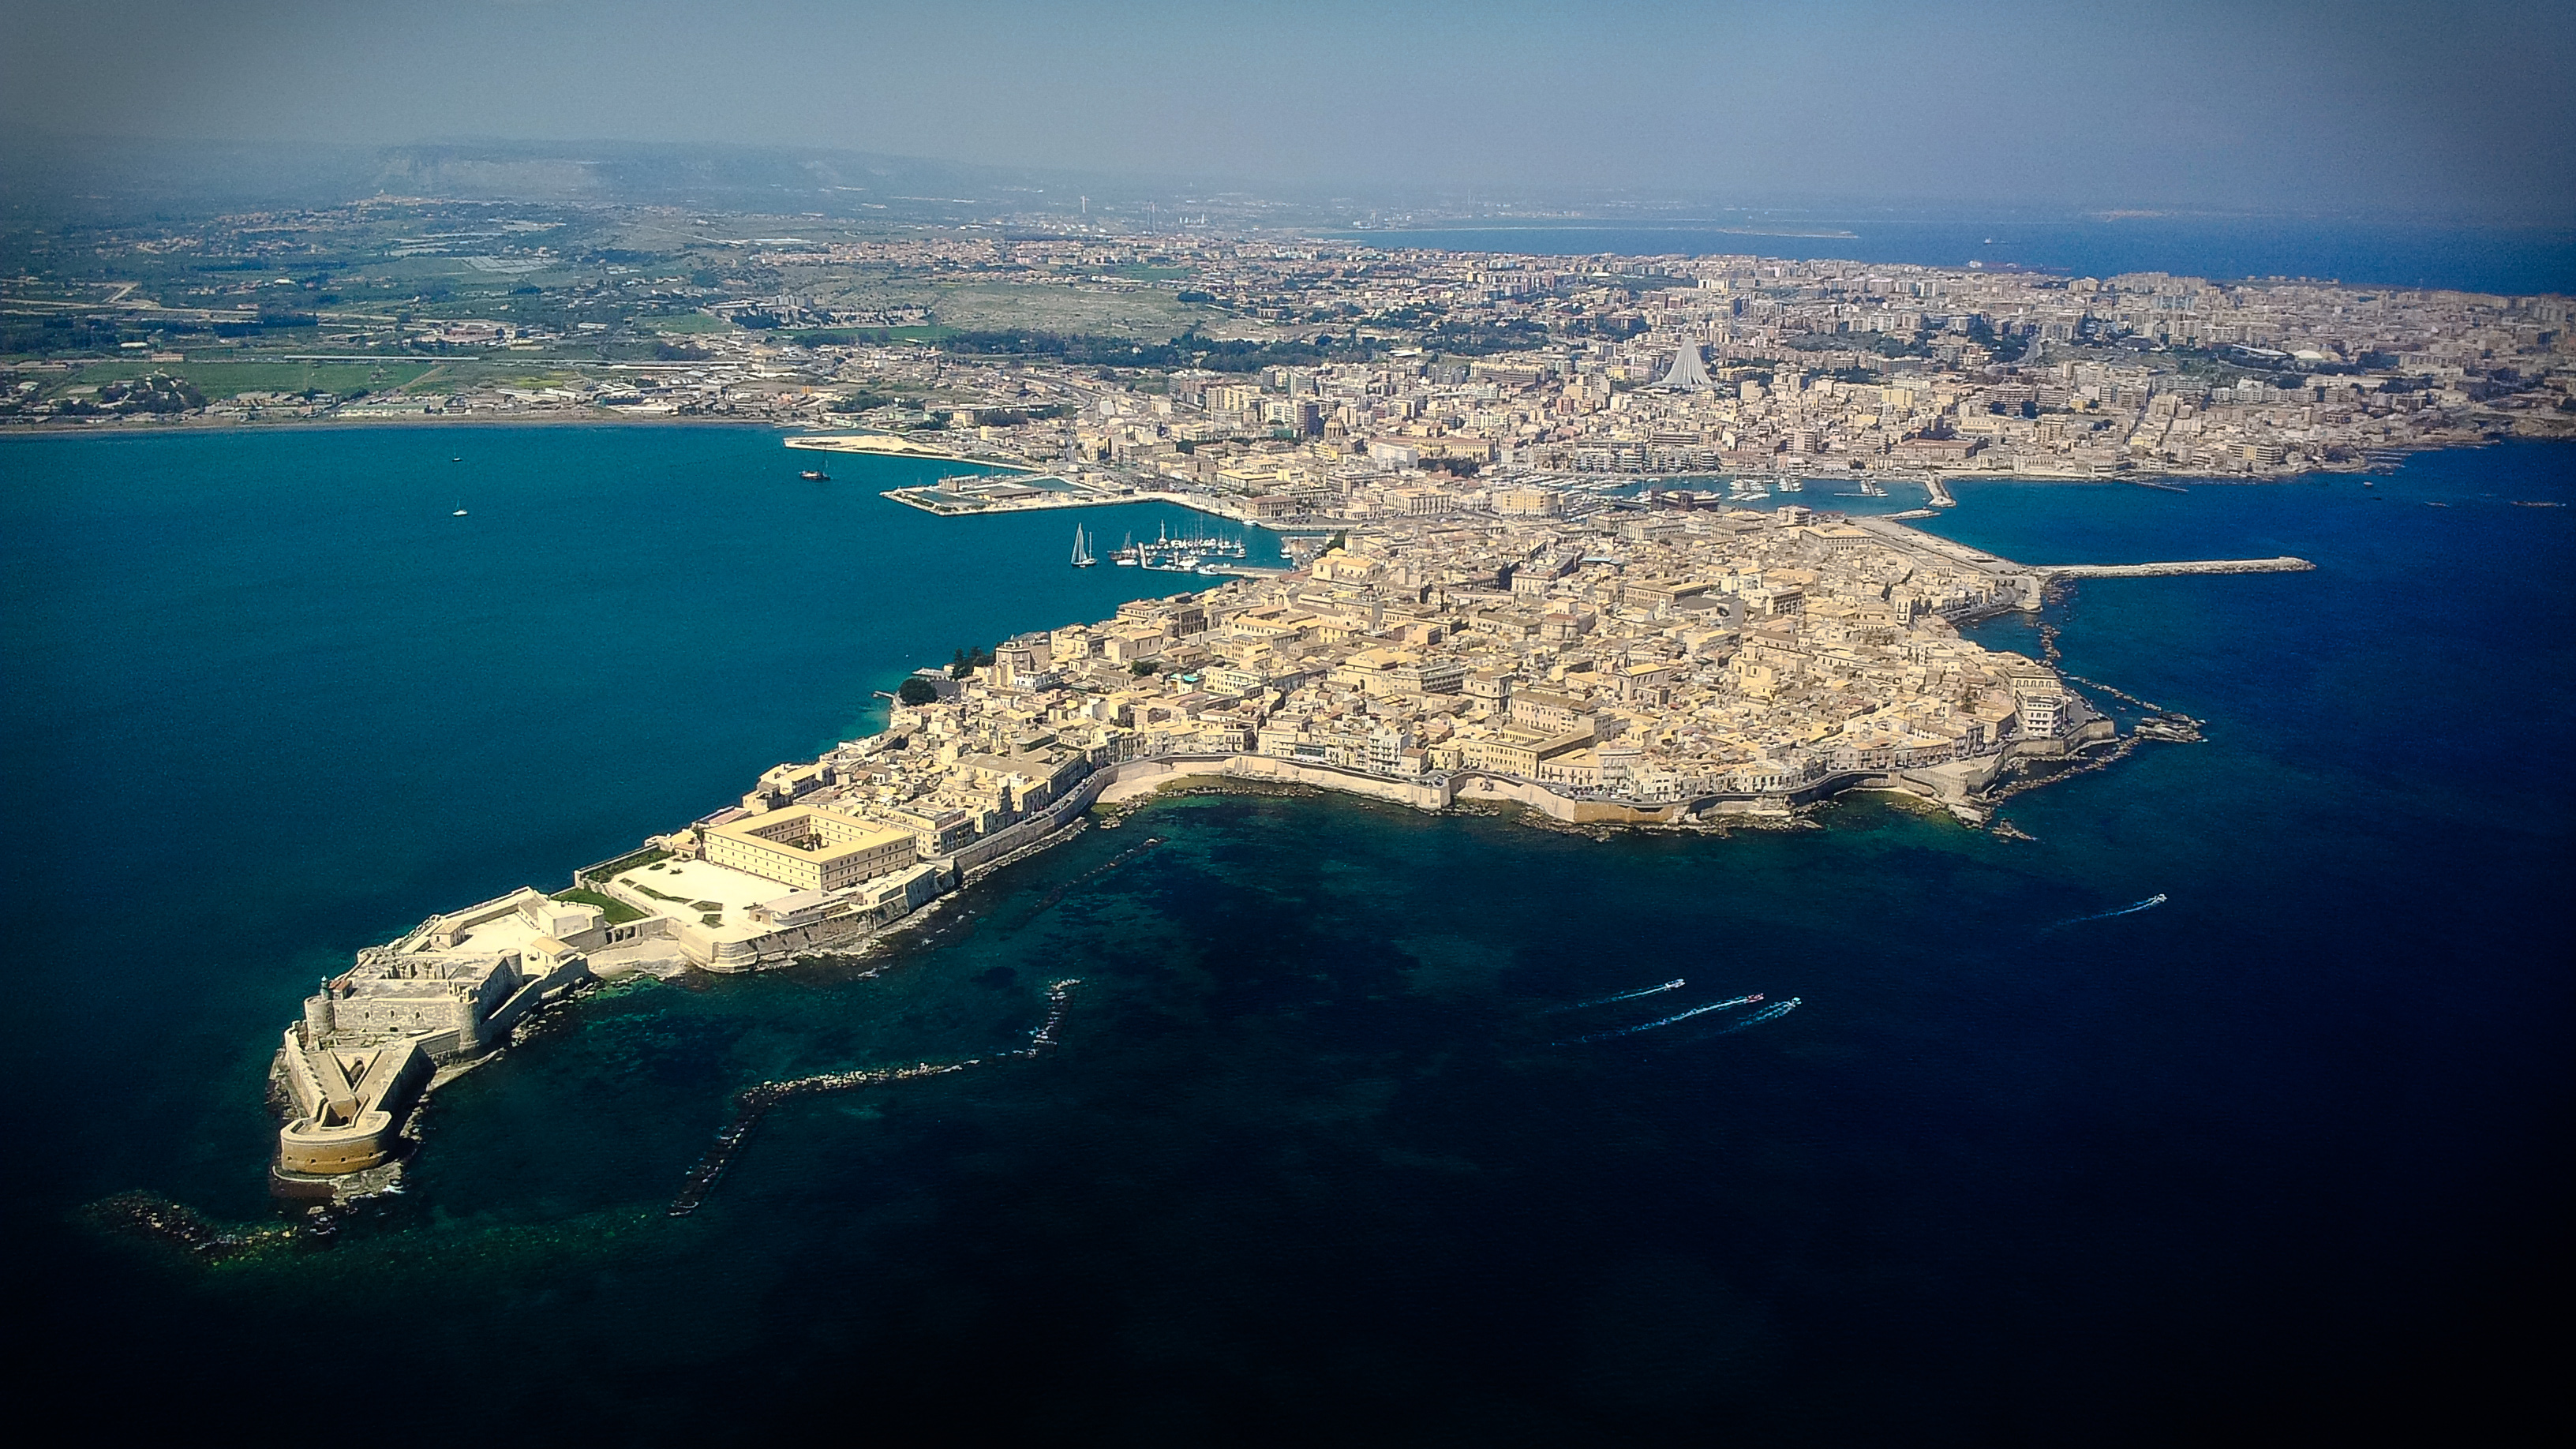 The island of Ortygia, where Syracuse was founded, is at the front of the picture